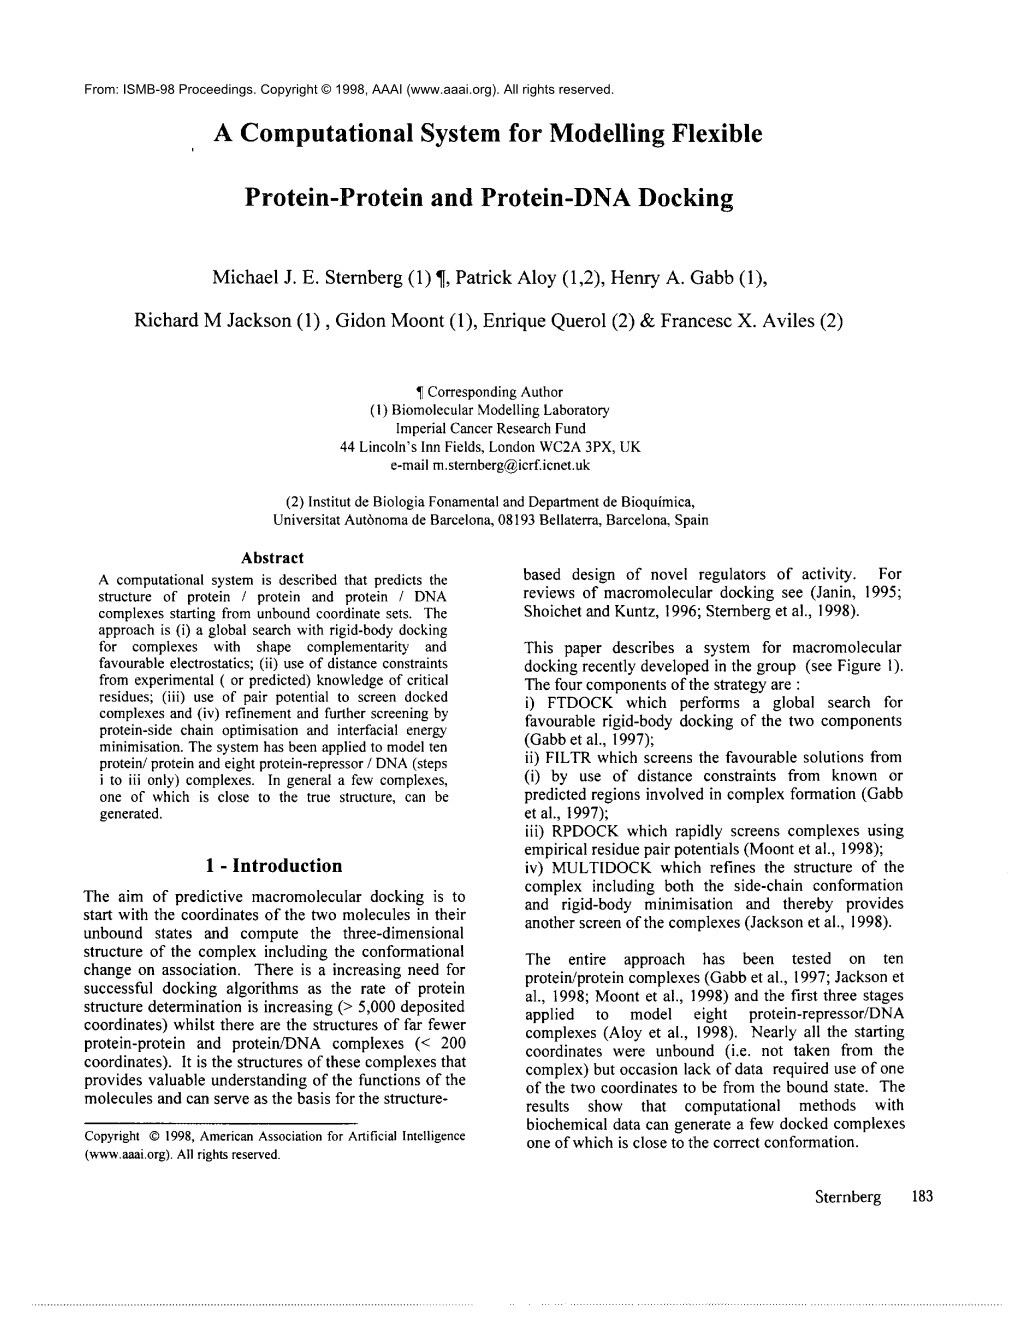 A Computational System for Modeling Flexible Protein-Protein and Protein